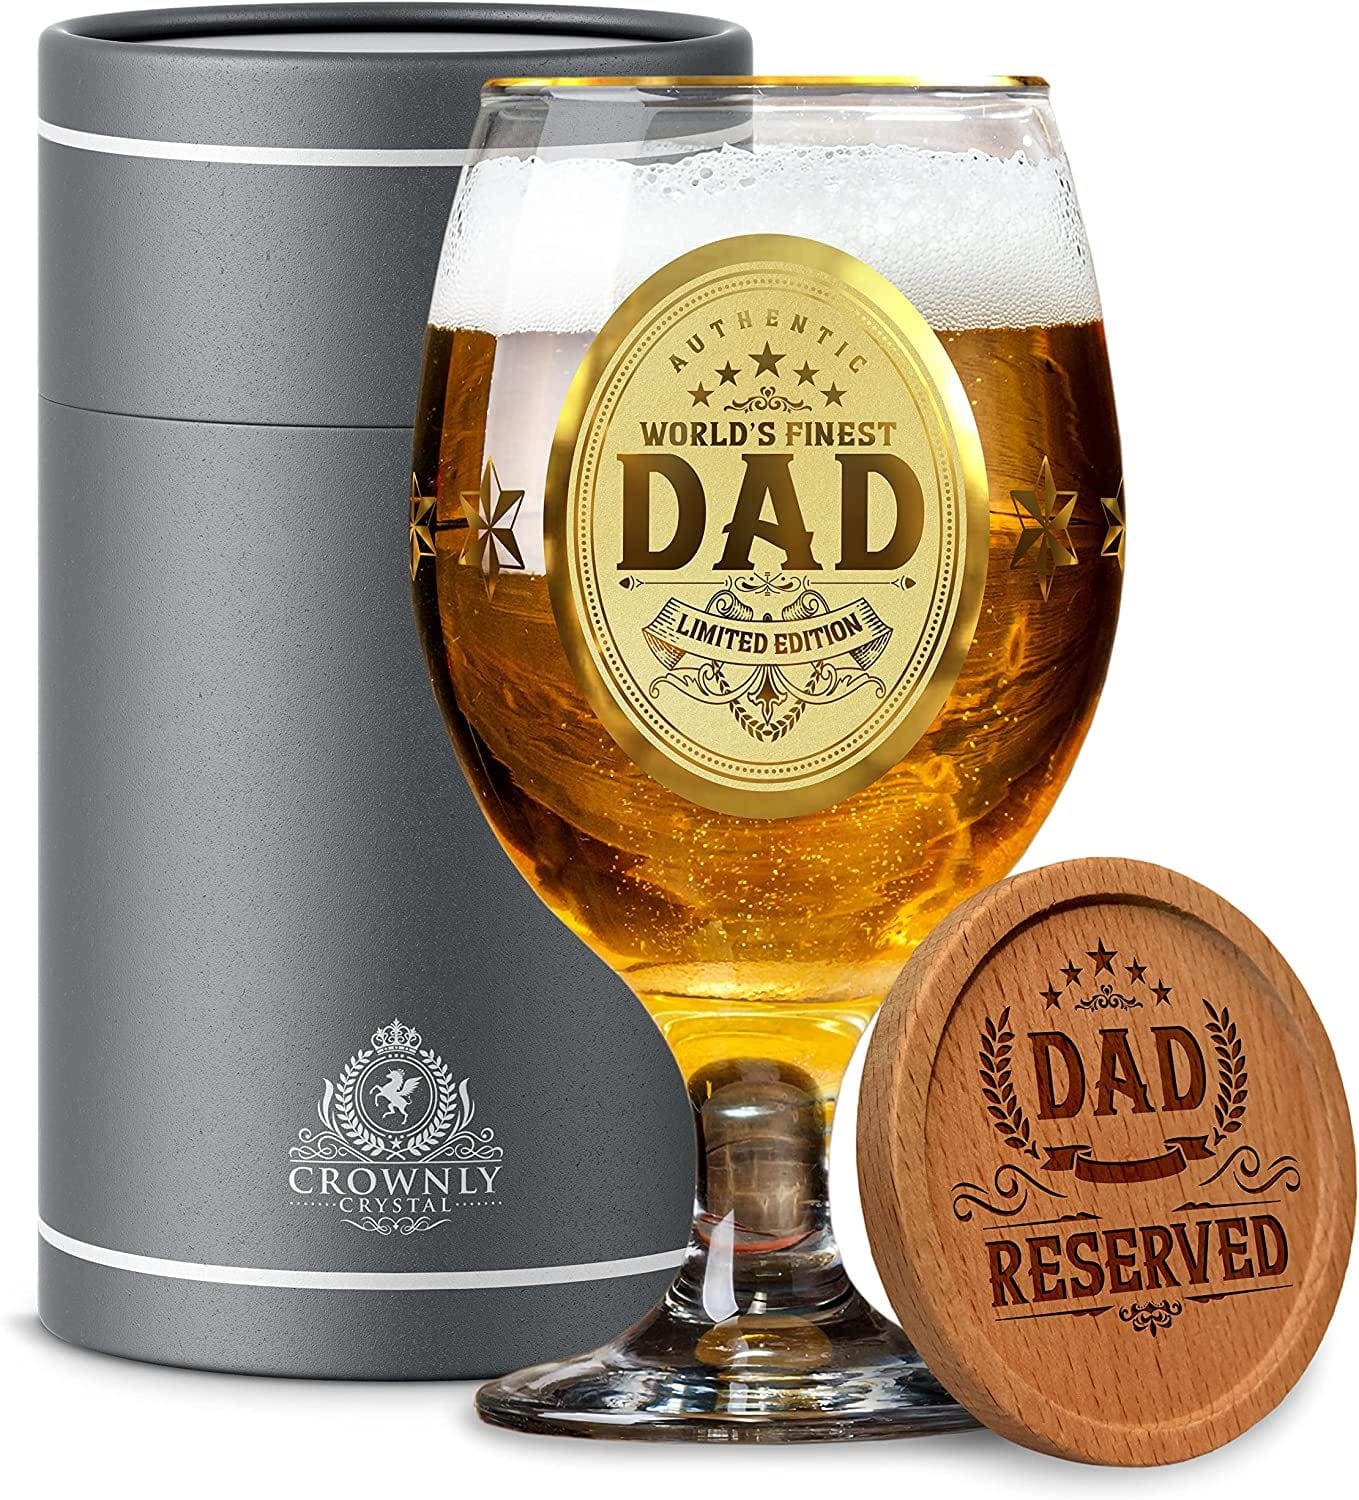 GeckoCustom ® Christmas Gifts for Dad Personalized Beer Glass Birthday Gifts for Dad Gifts from Daughter Birthday Gifts for Dad from Son Dad Glasses Best Dad Gifts for Christmas Gifts for Men Dad Glass